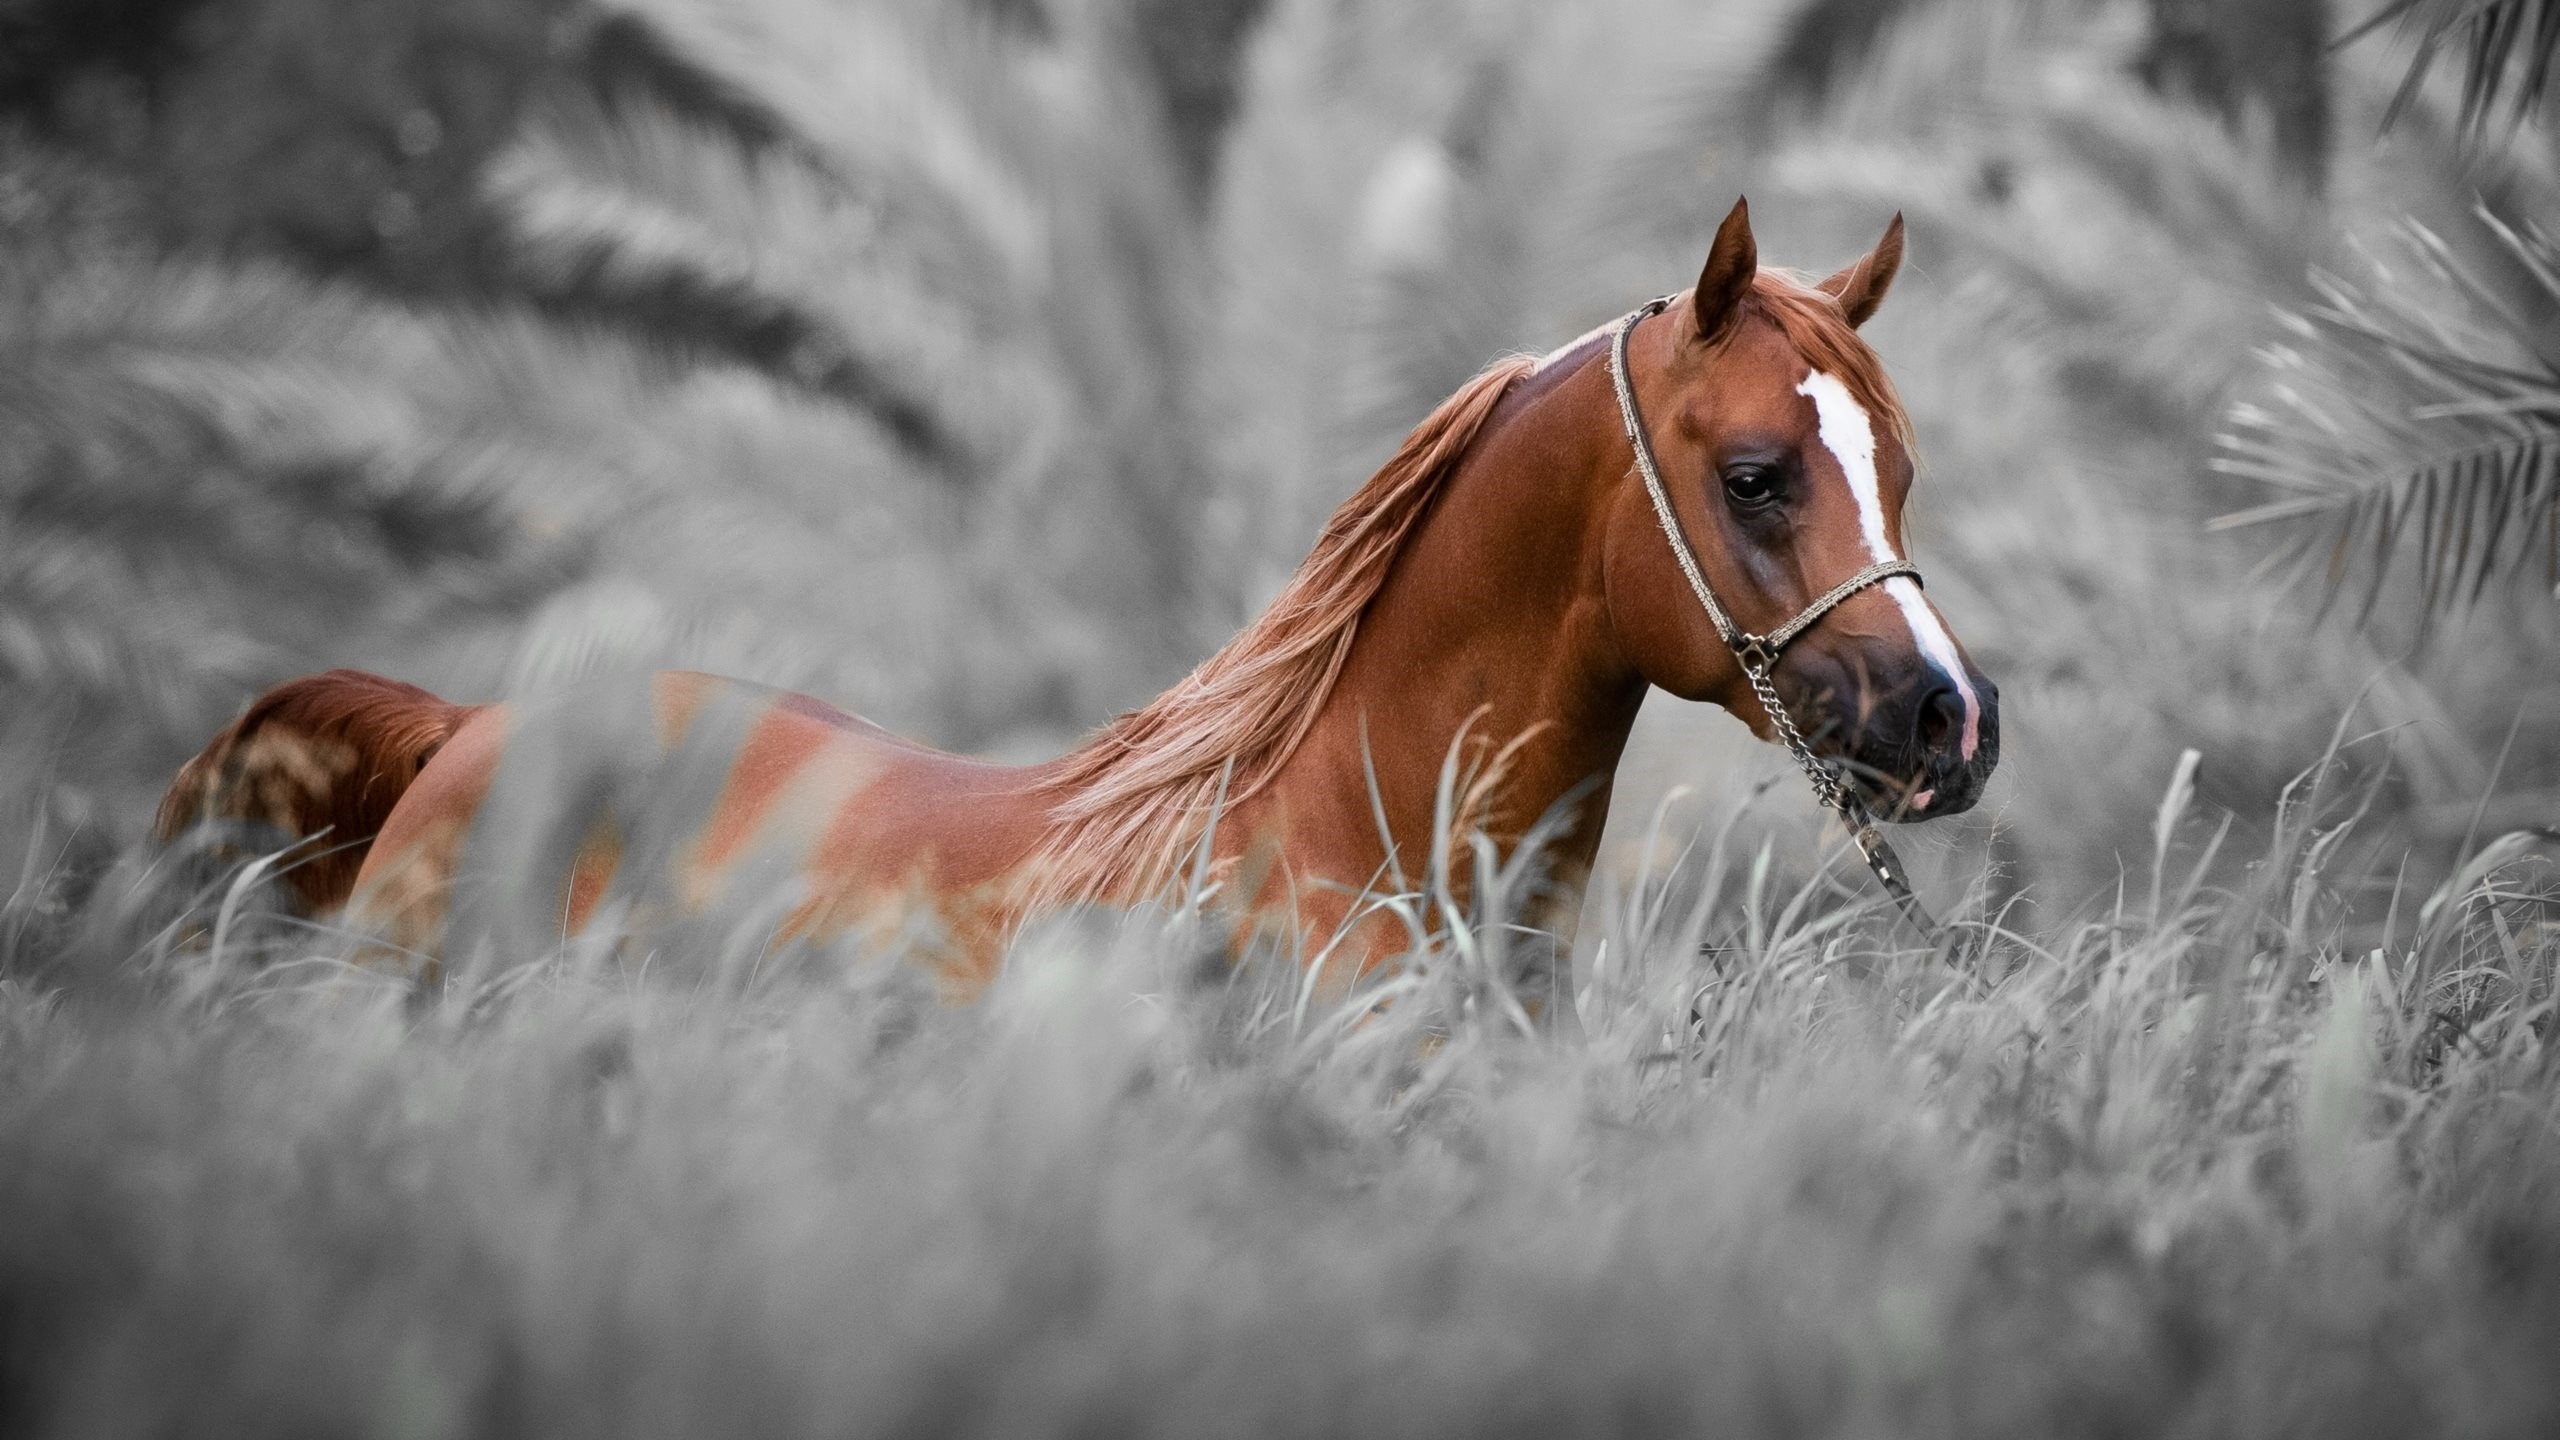 2560x1440 0 Horse Wallpapers Best Wallpapers Horse Wallpapers For Android